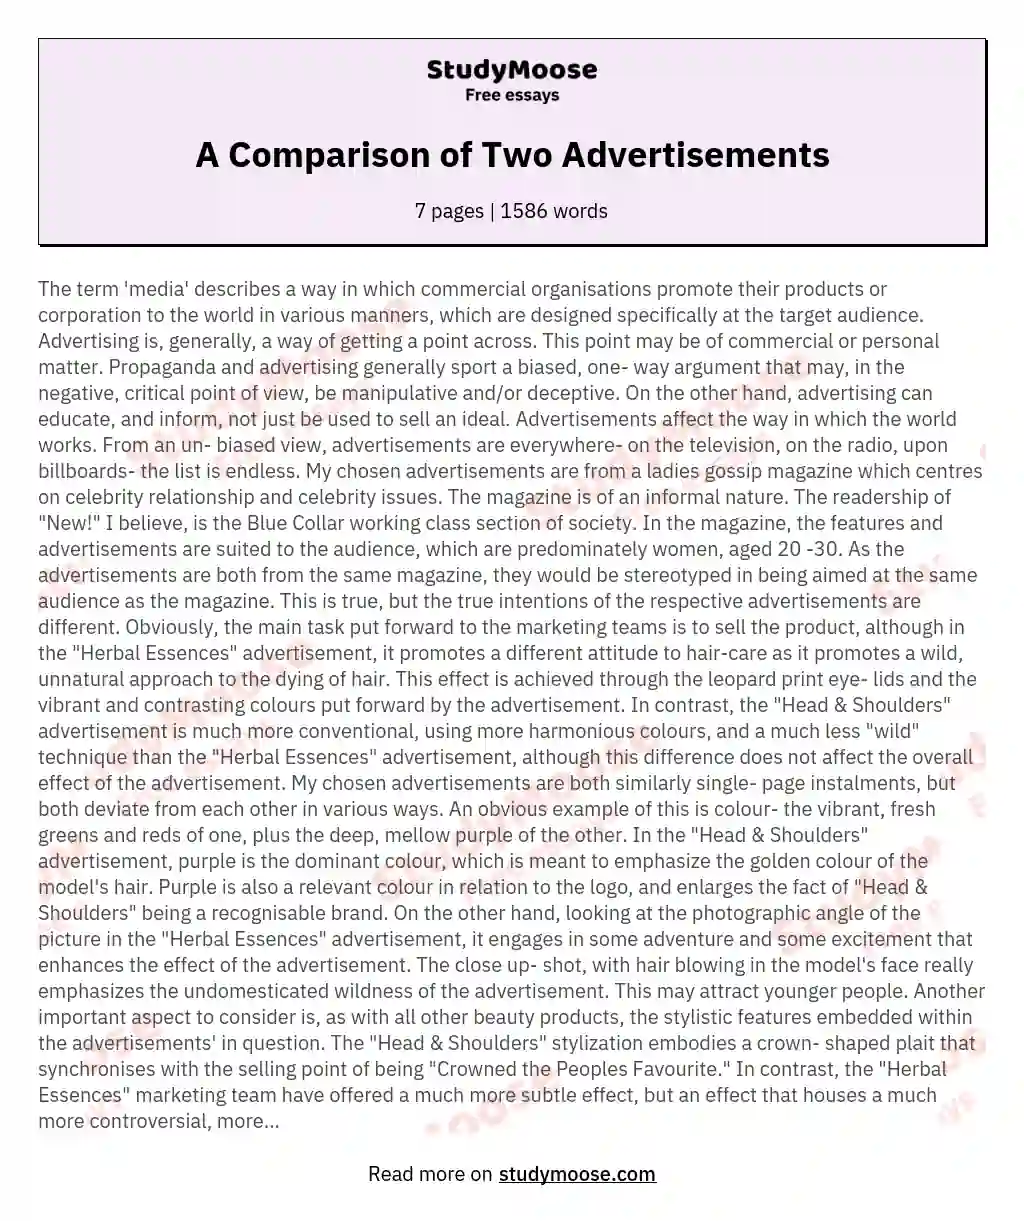 A Comparison of Two Advertisements essay